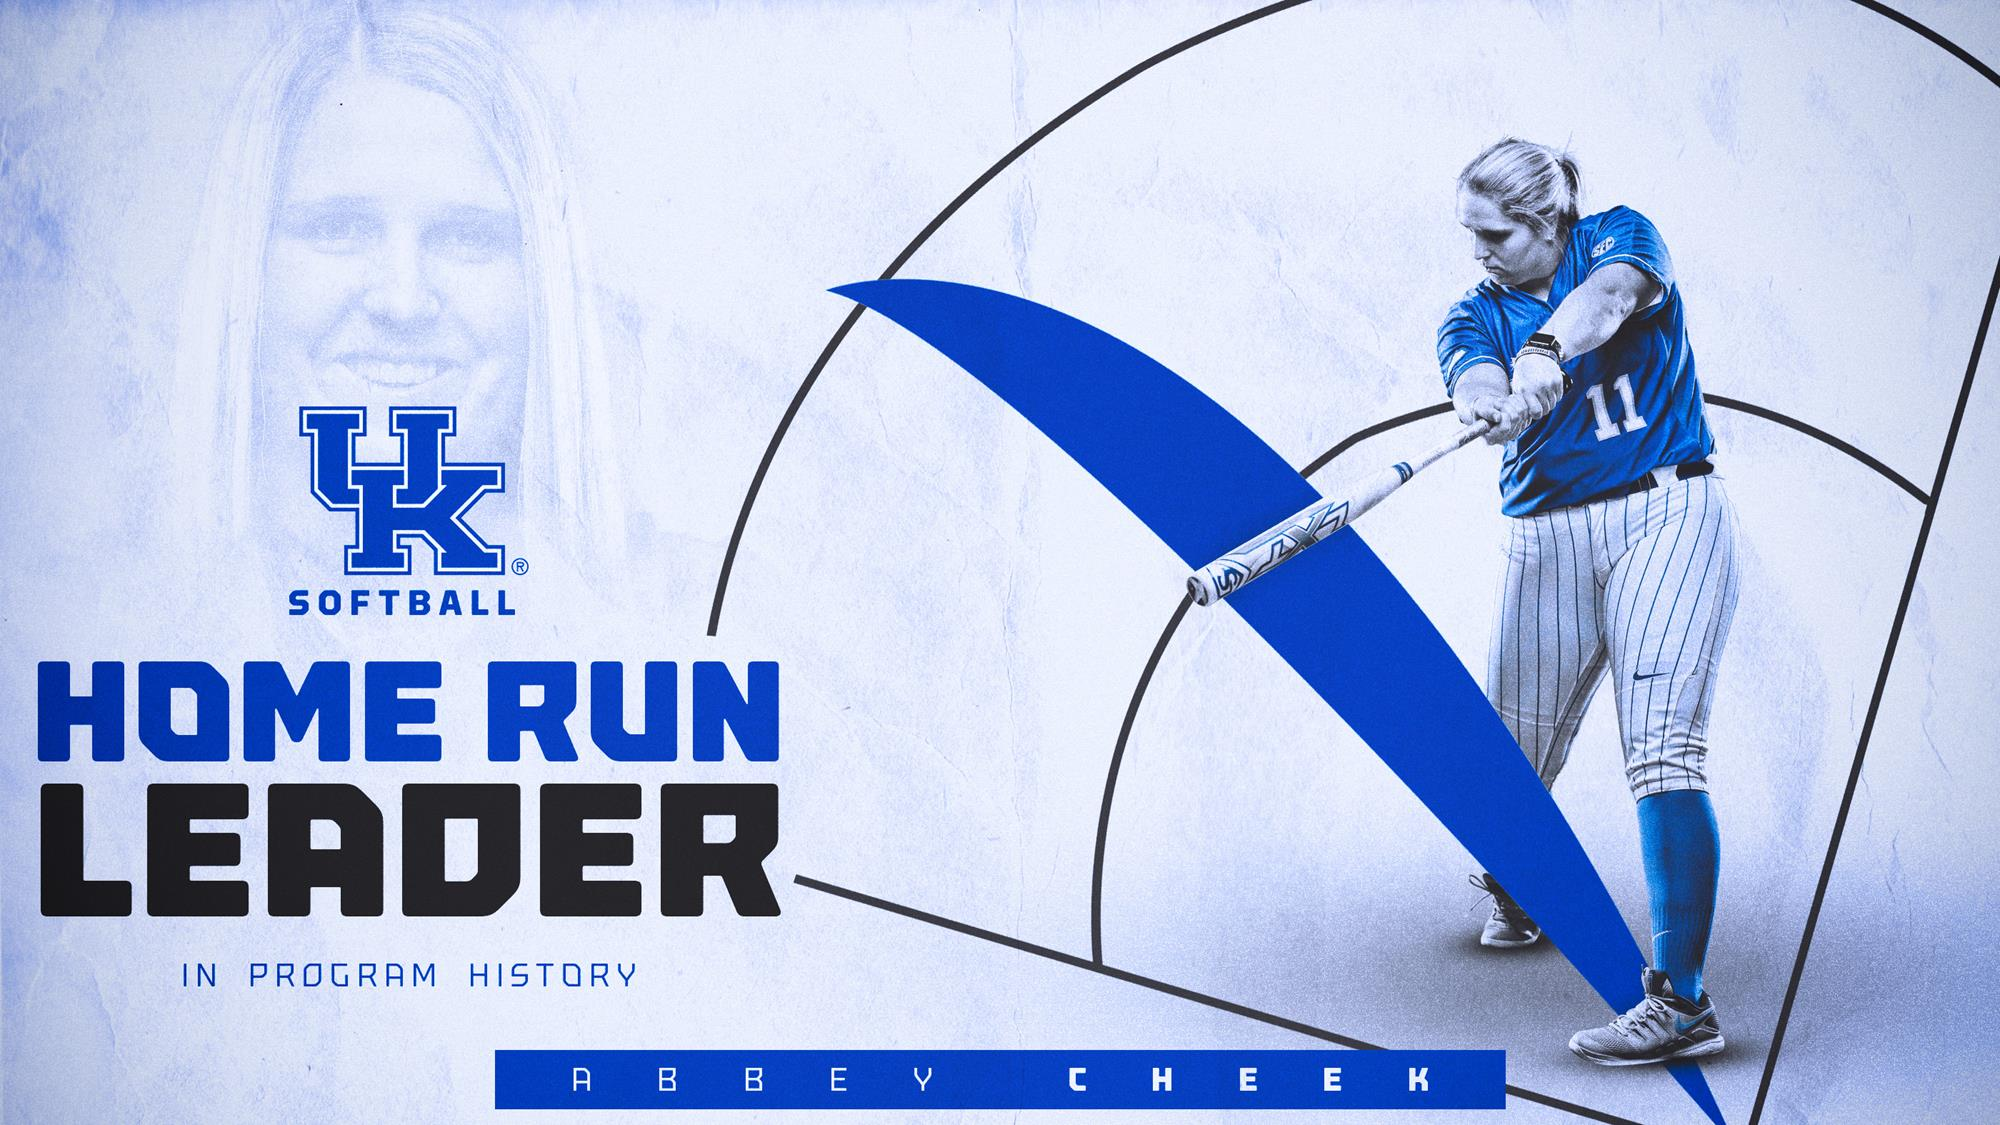 Abbey Cheek Shatters Home Run Record with 49th of Her Career